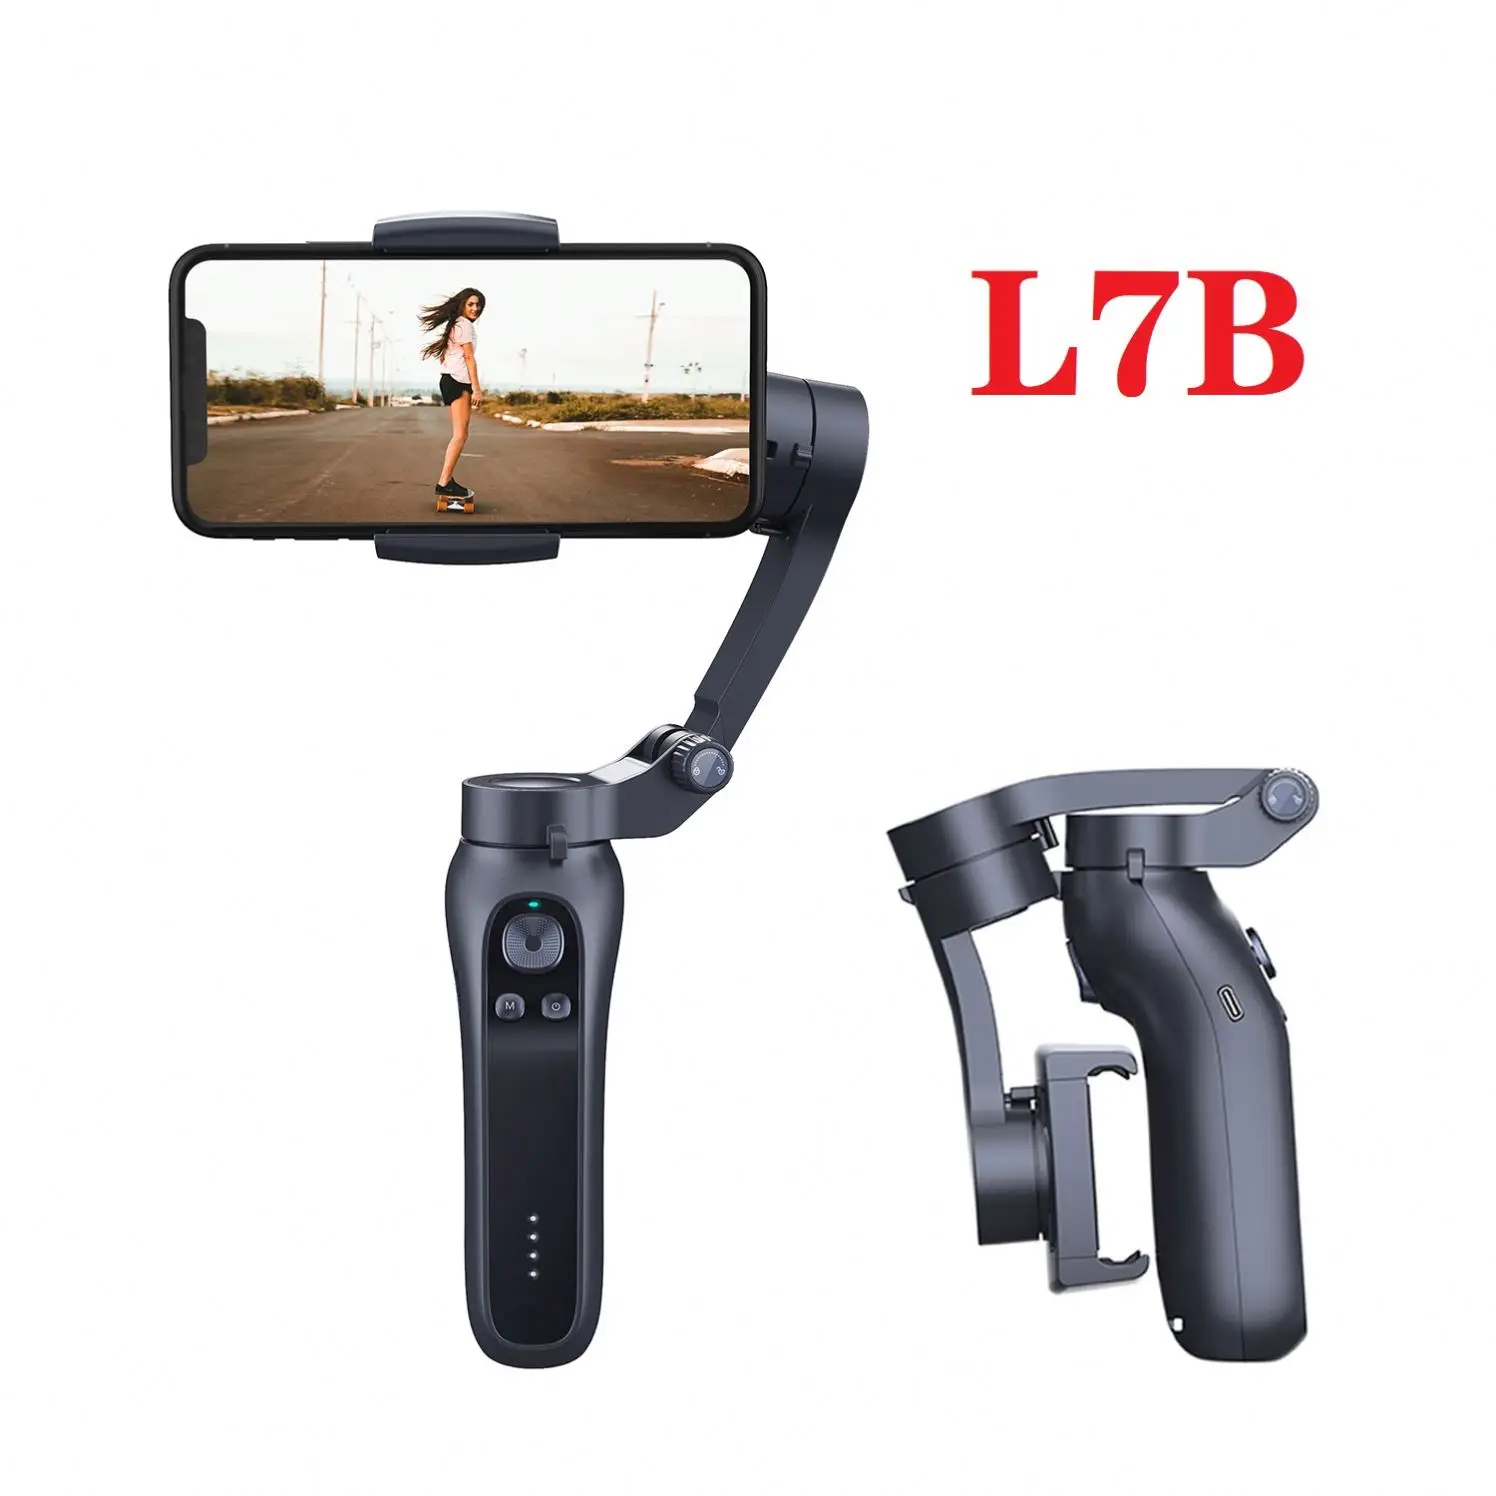 

Superior Quality Handheld 3 Axis Gimble Gimbal Stabilizer for Mobile Phone Smartphone video vlog recording, Black